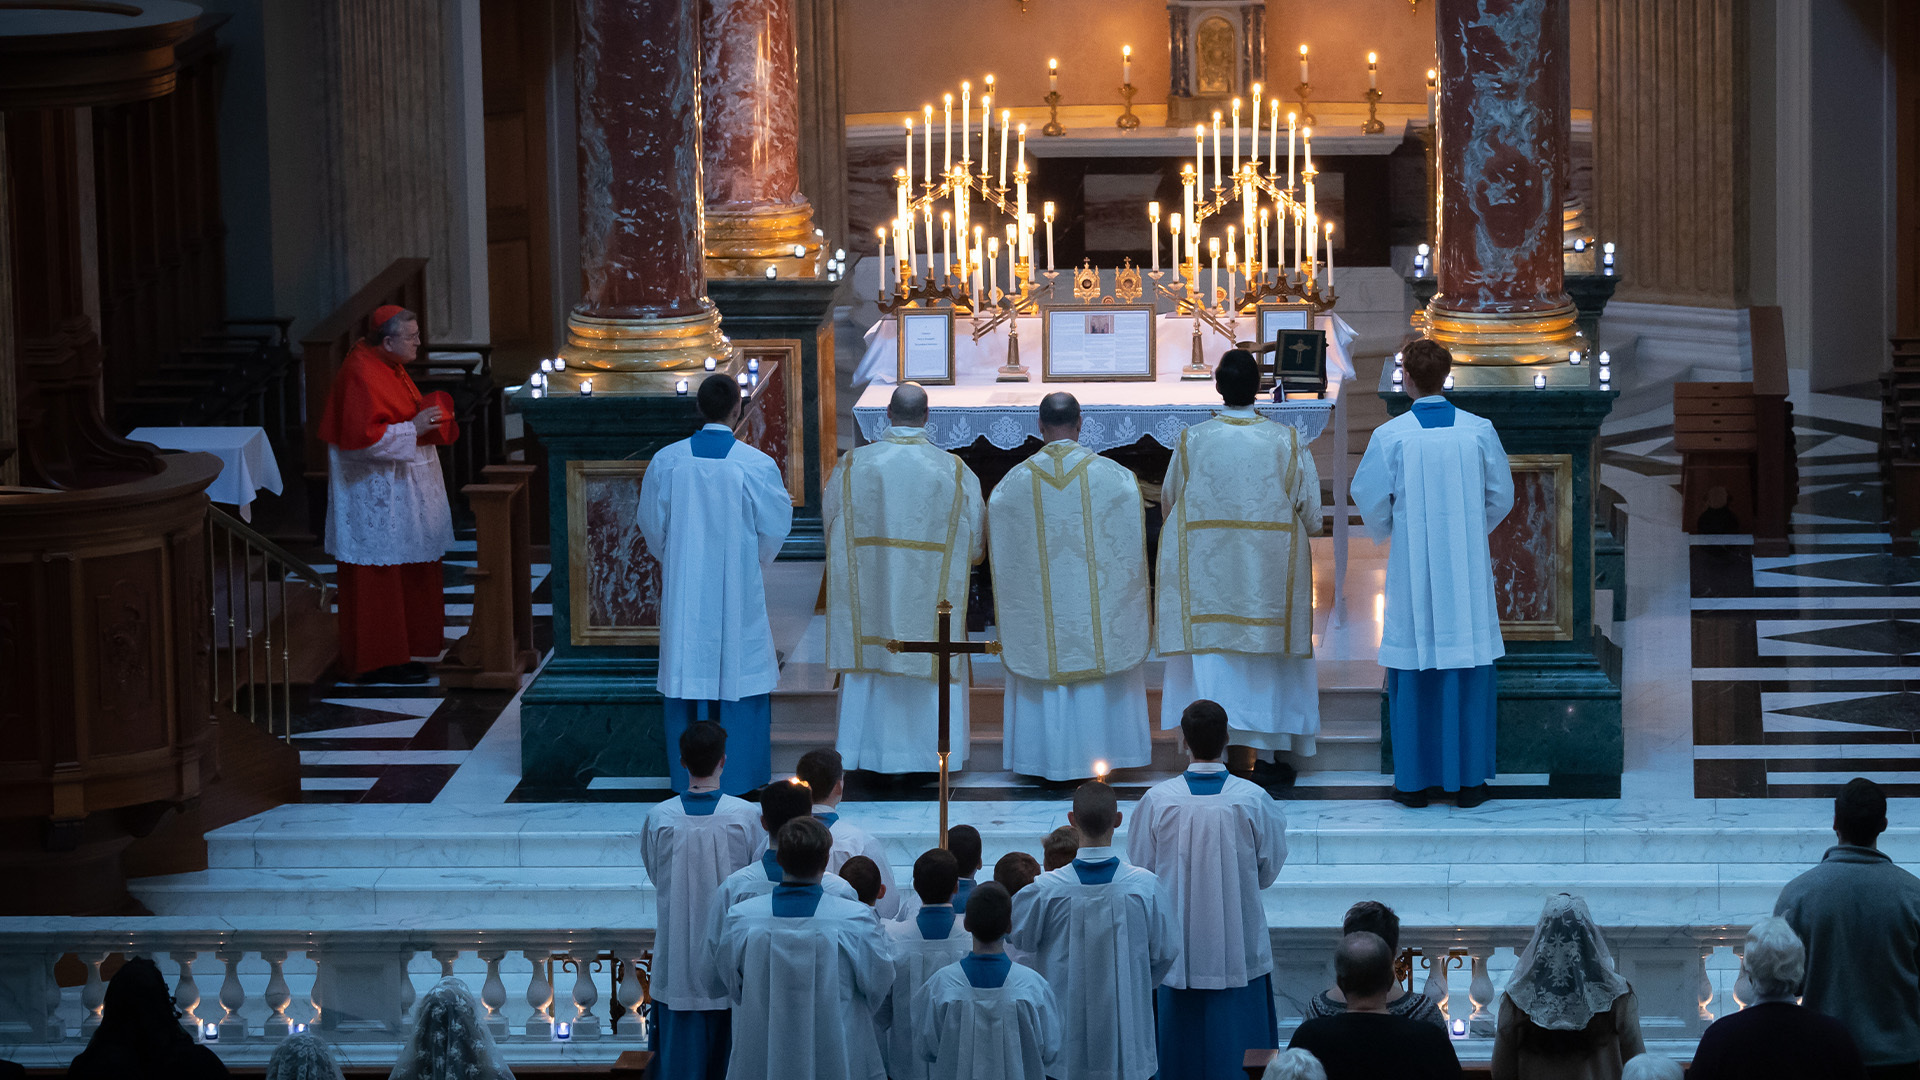 A Rorate Caeli Mass: An Advent Tradition Honoring Our Lady, La Crosse, Wisconsin, United States